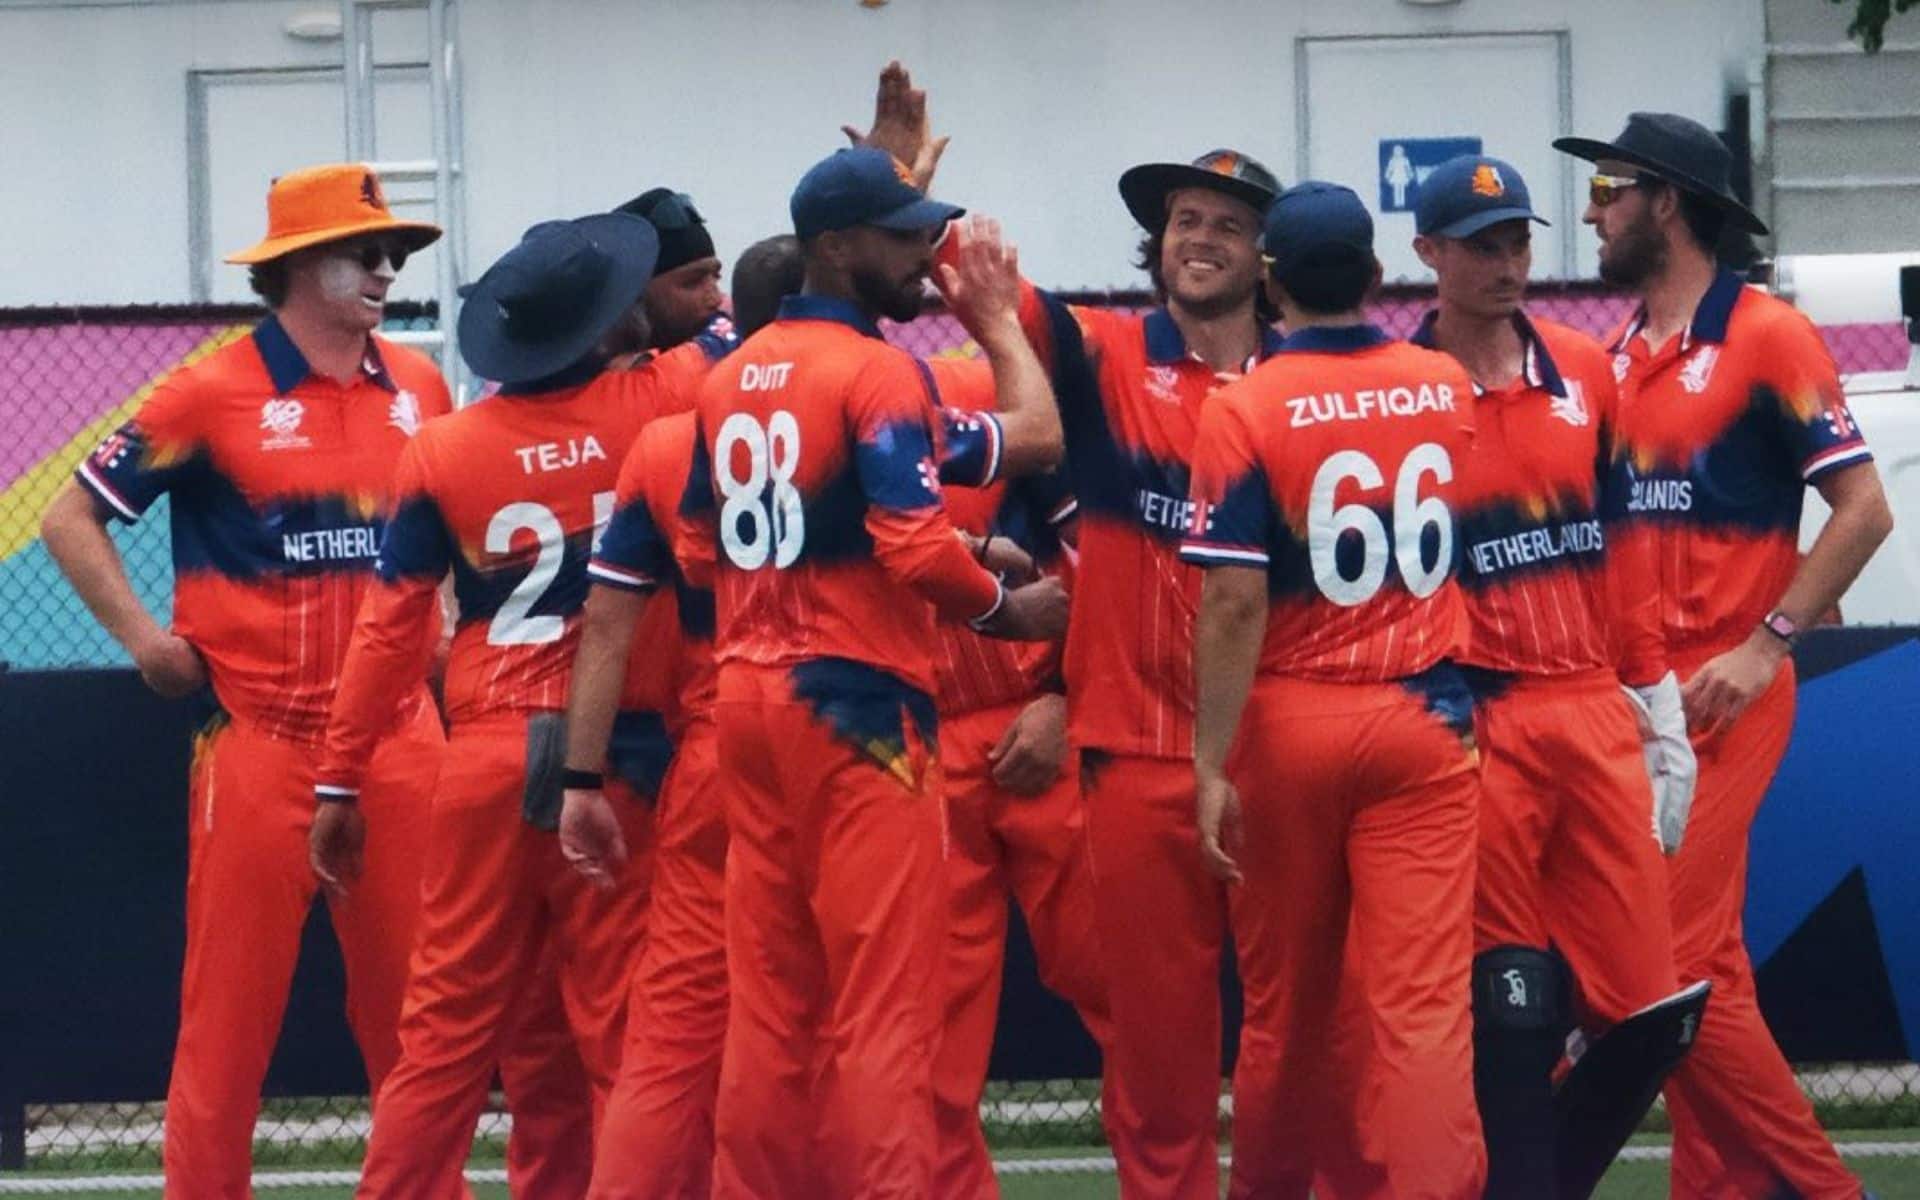 Spirited Netherlands Show Their Might As They Outclass Sri Lanka In A Warm-Up Fixture